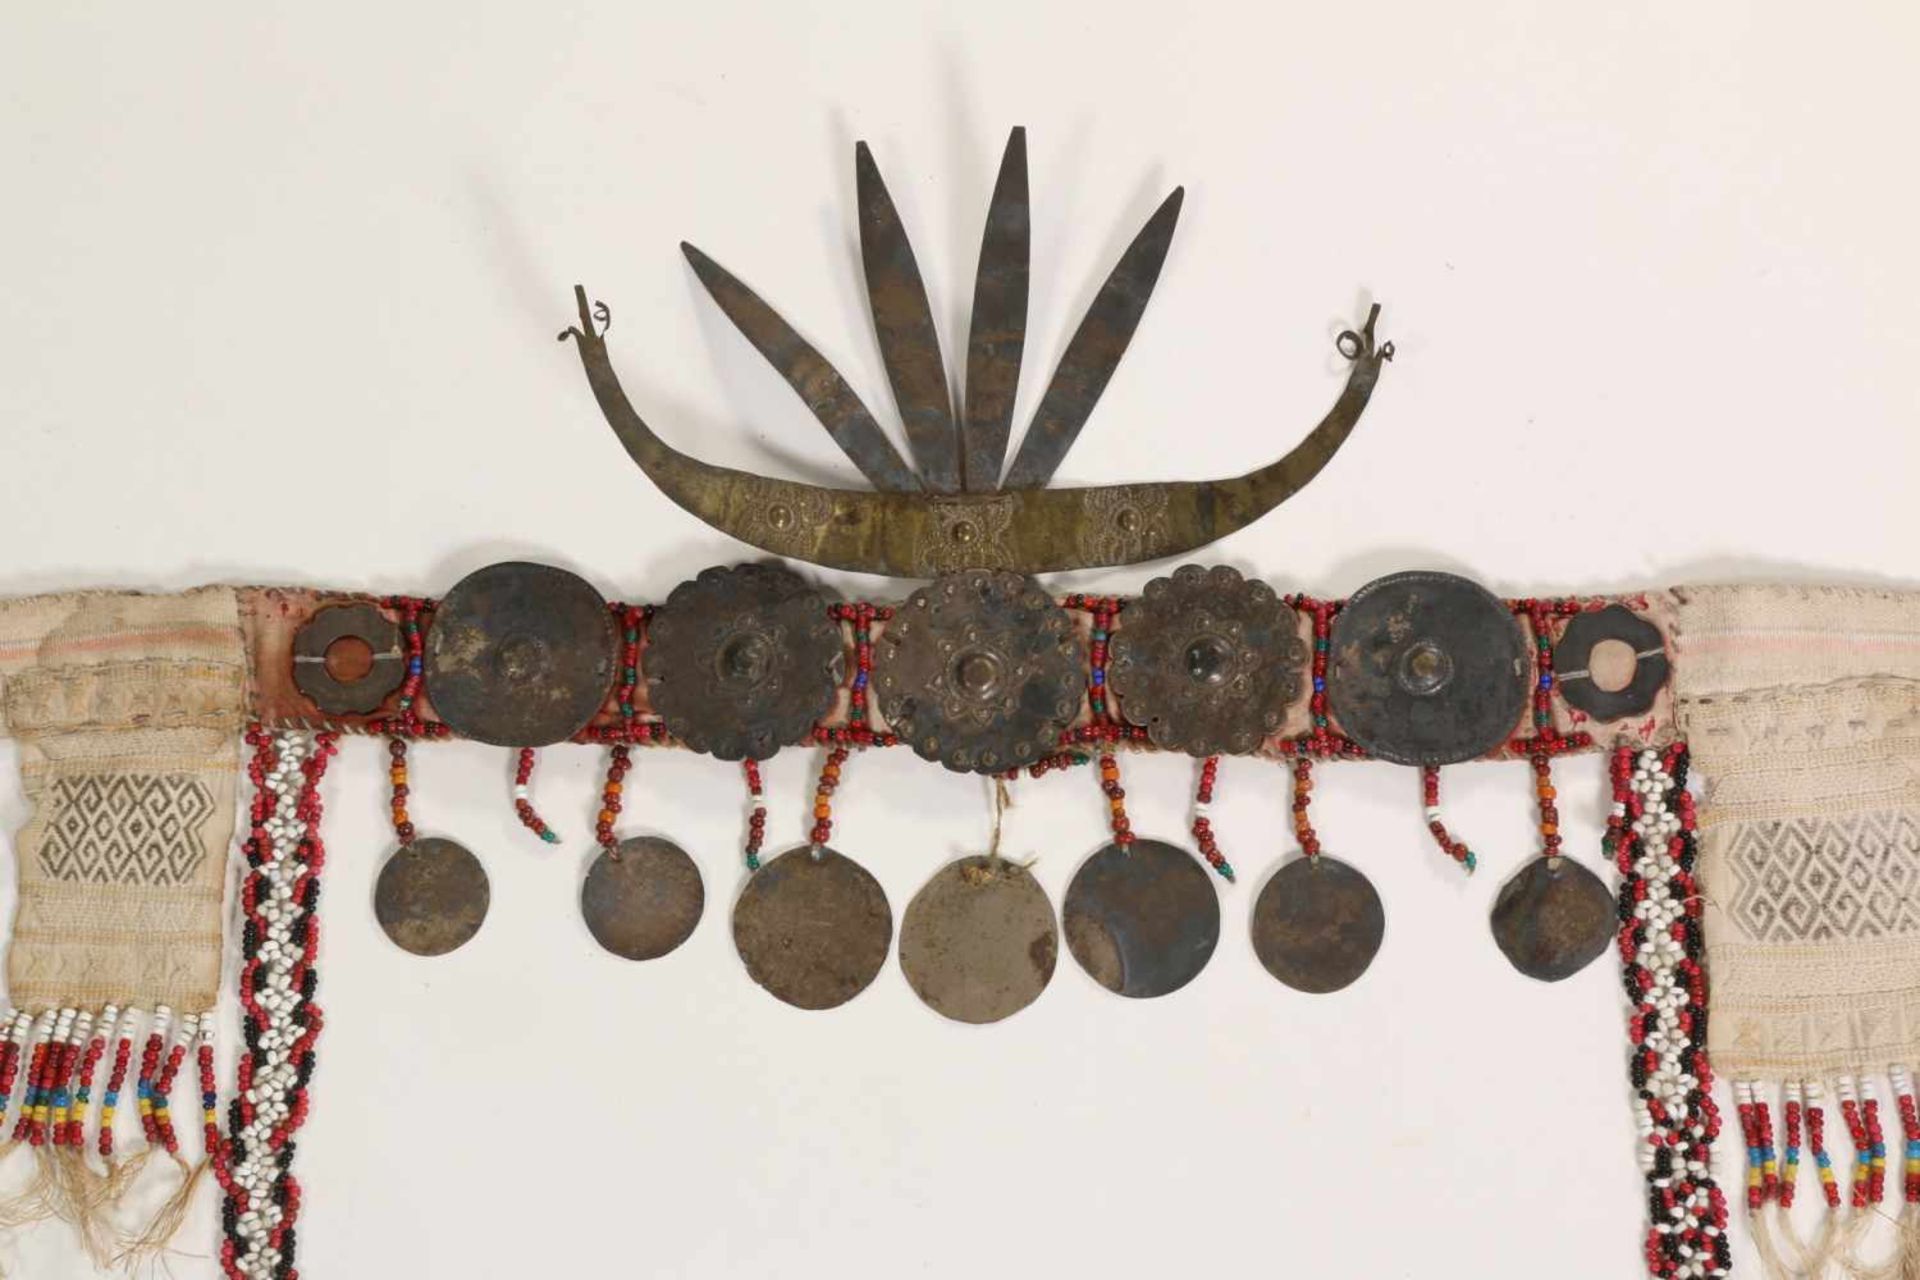 Timor, headhunters jewellery;woven textile with beads and metal ornaments and crown, h. 17 cm. [1] - Bild 2 aus 3